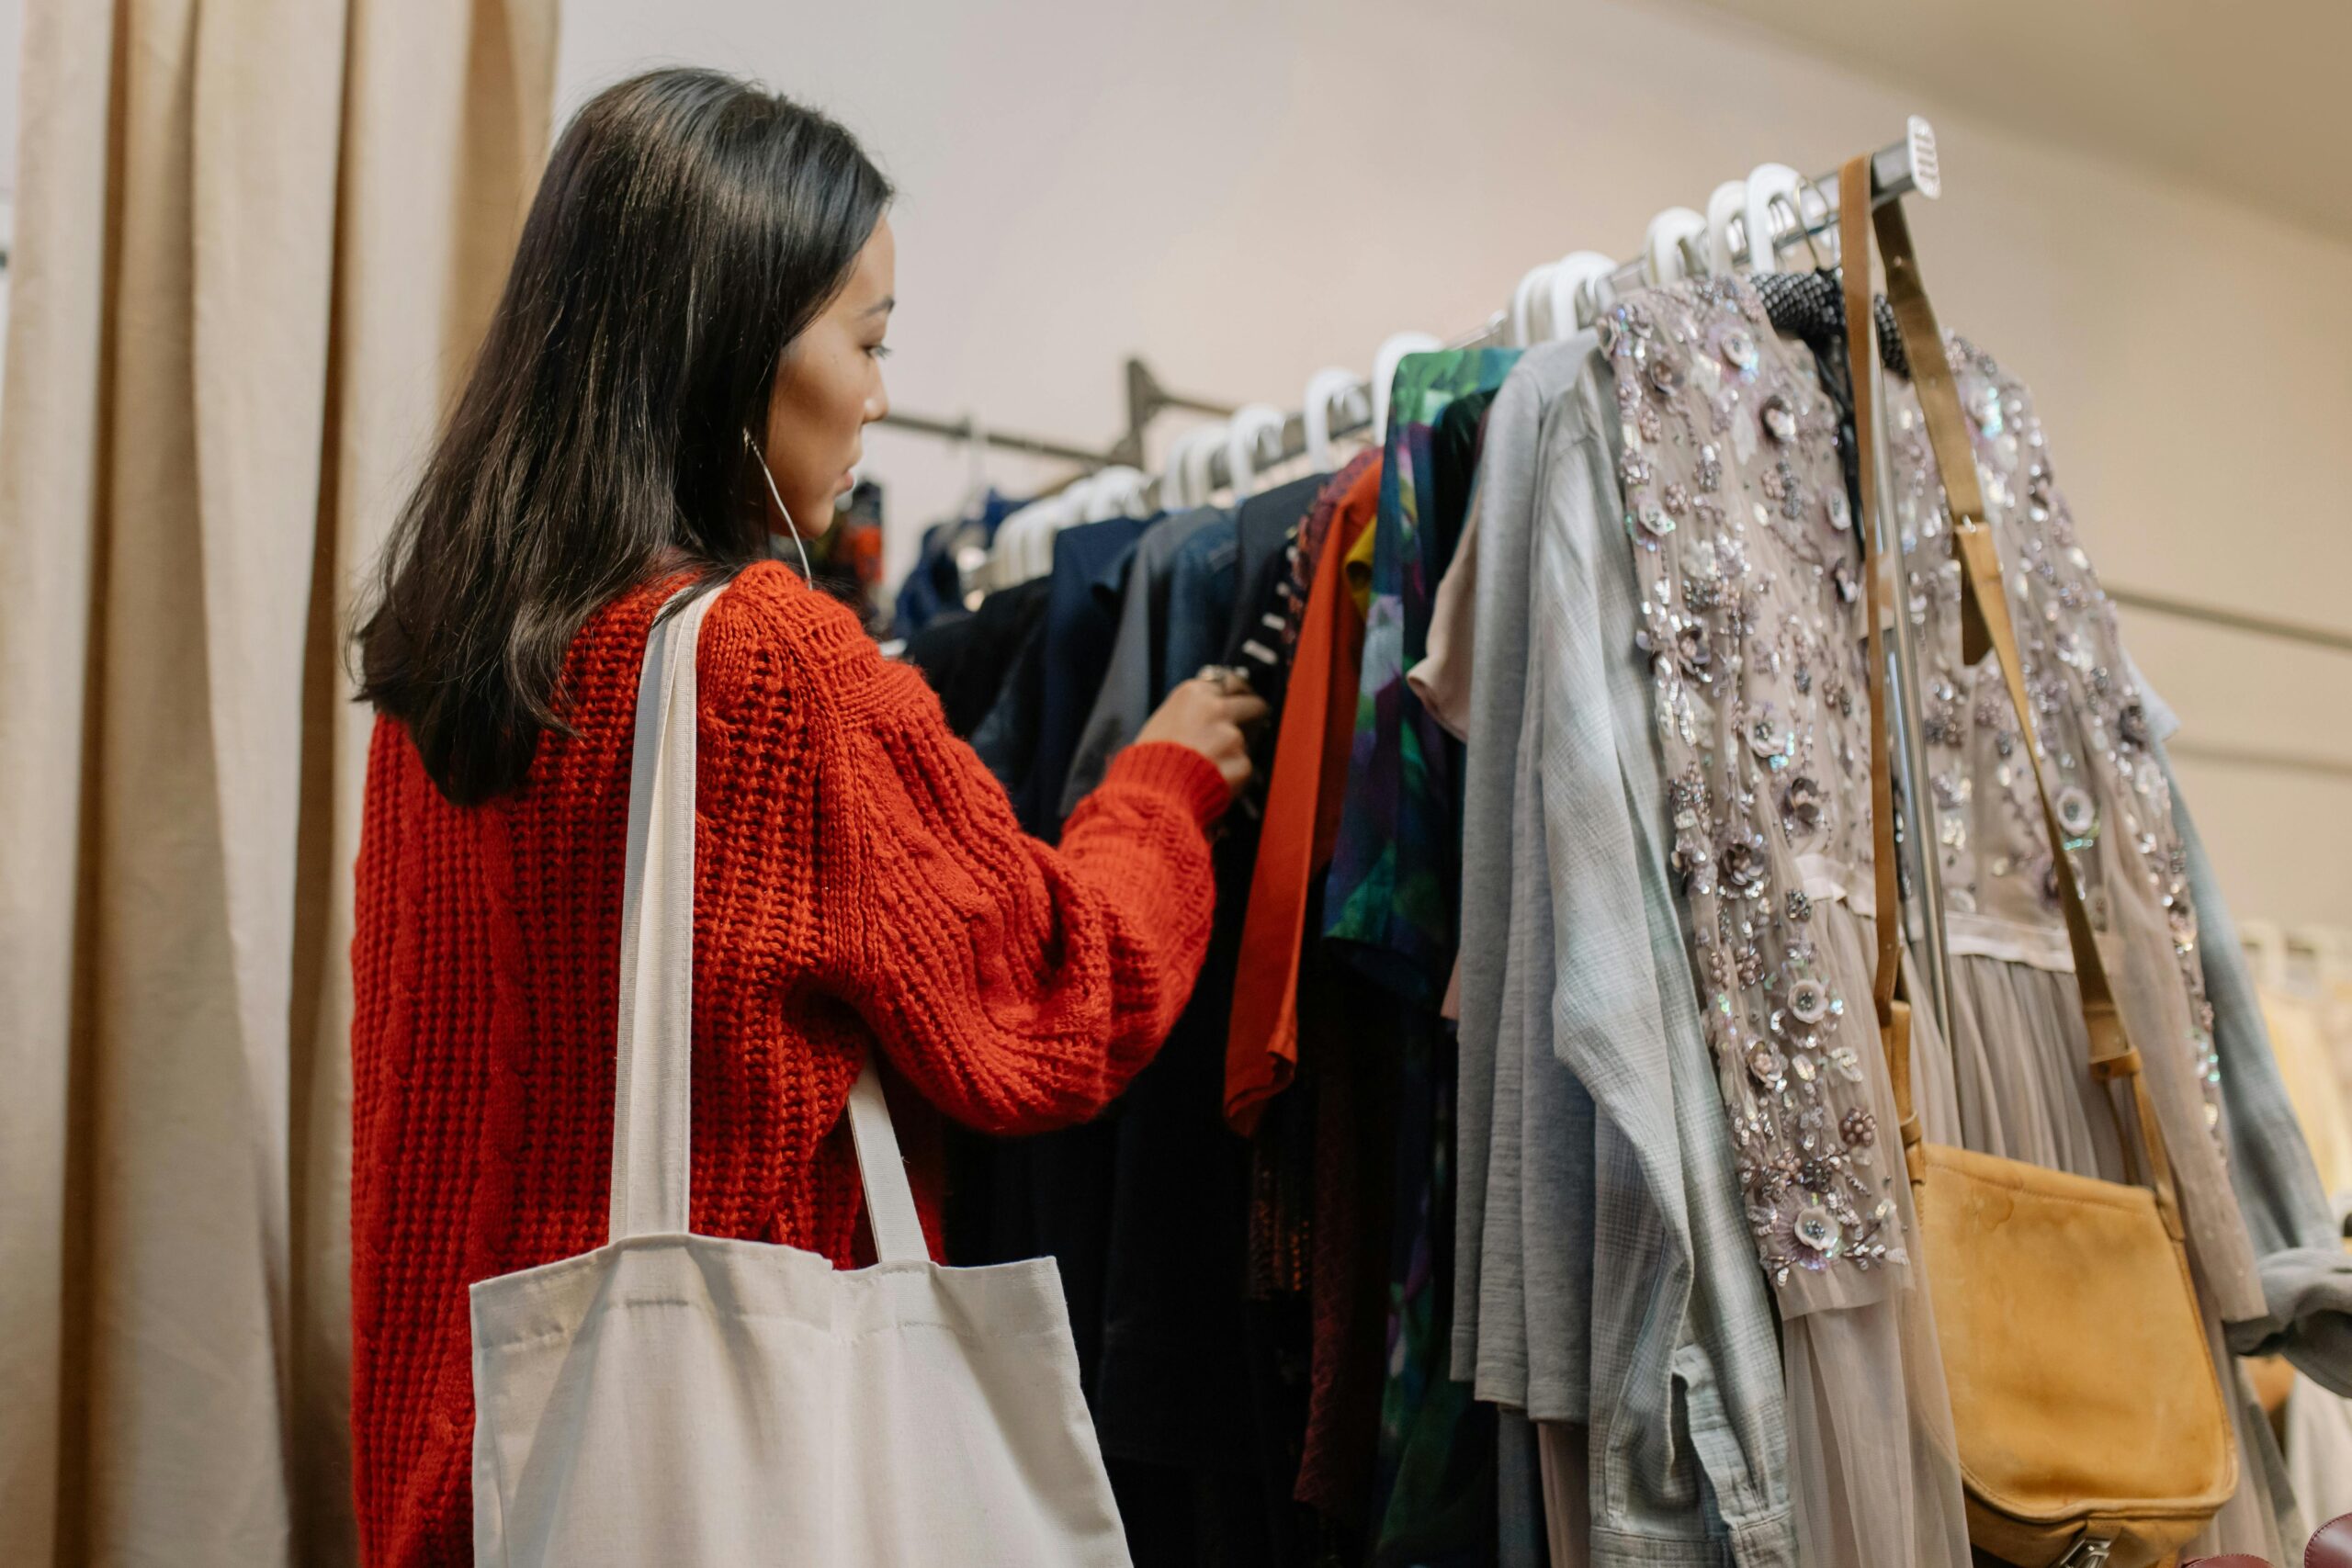 Consider buying secondhand items for clothing, furniture, and household goods. Thrift stores, consignment shops, and online marketplaces offer great deals on gently used items. Not only will you save money, but you’ll also reduce waste and contribute to a more sustainable lifestyle. :: Pexels